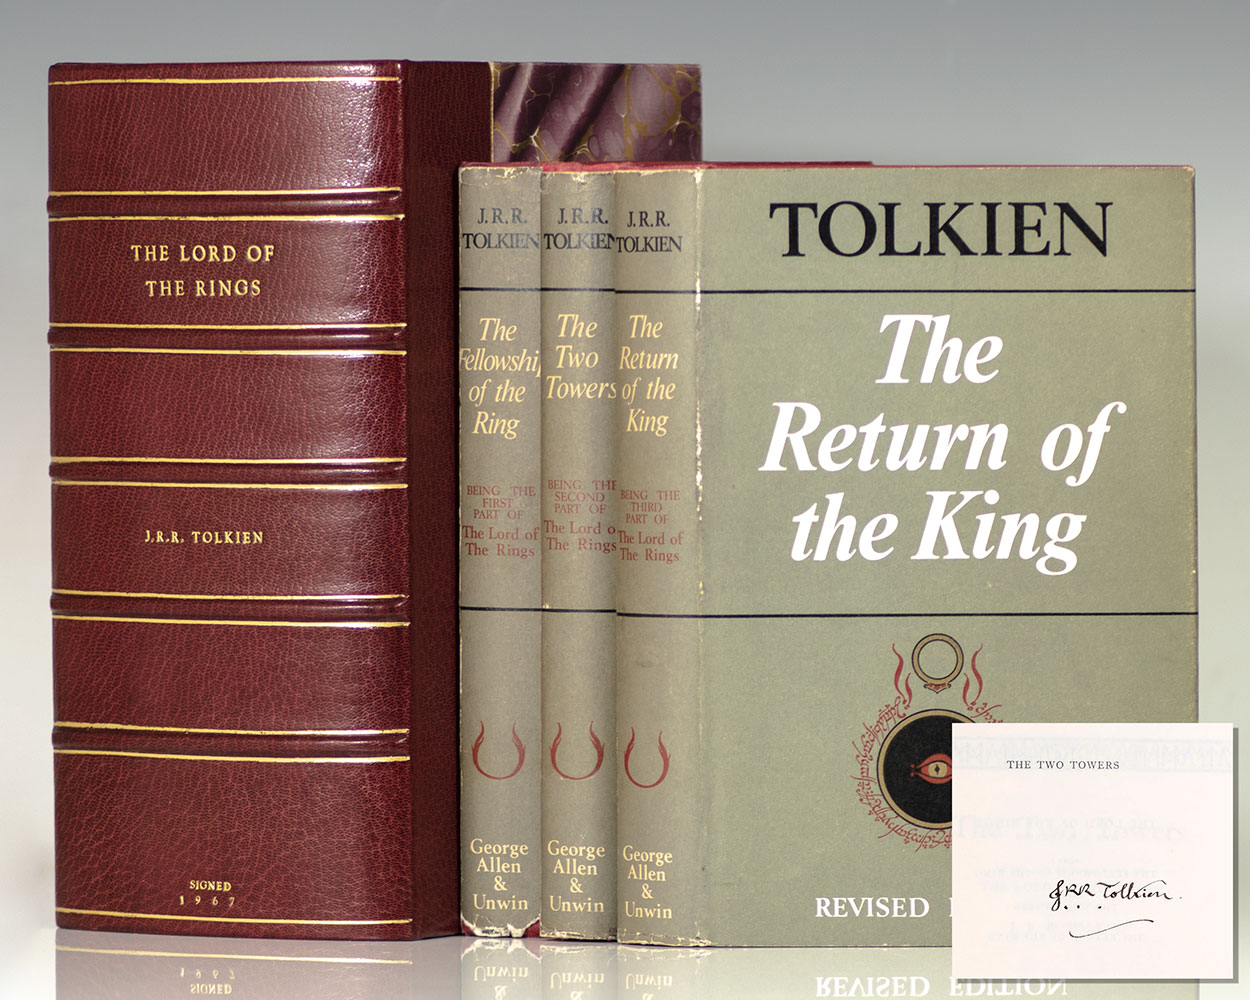 Lord of the rings trilogy | Stuff for Sale - Gumtree